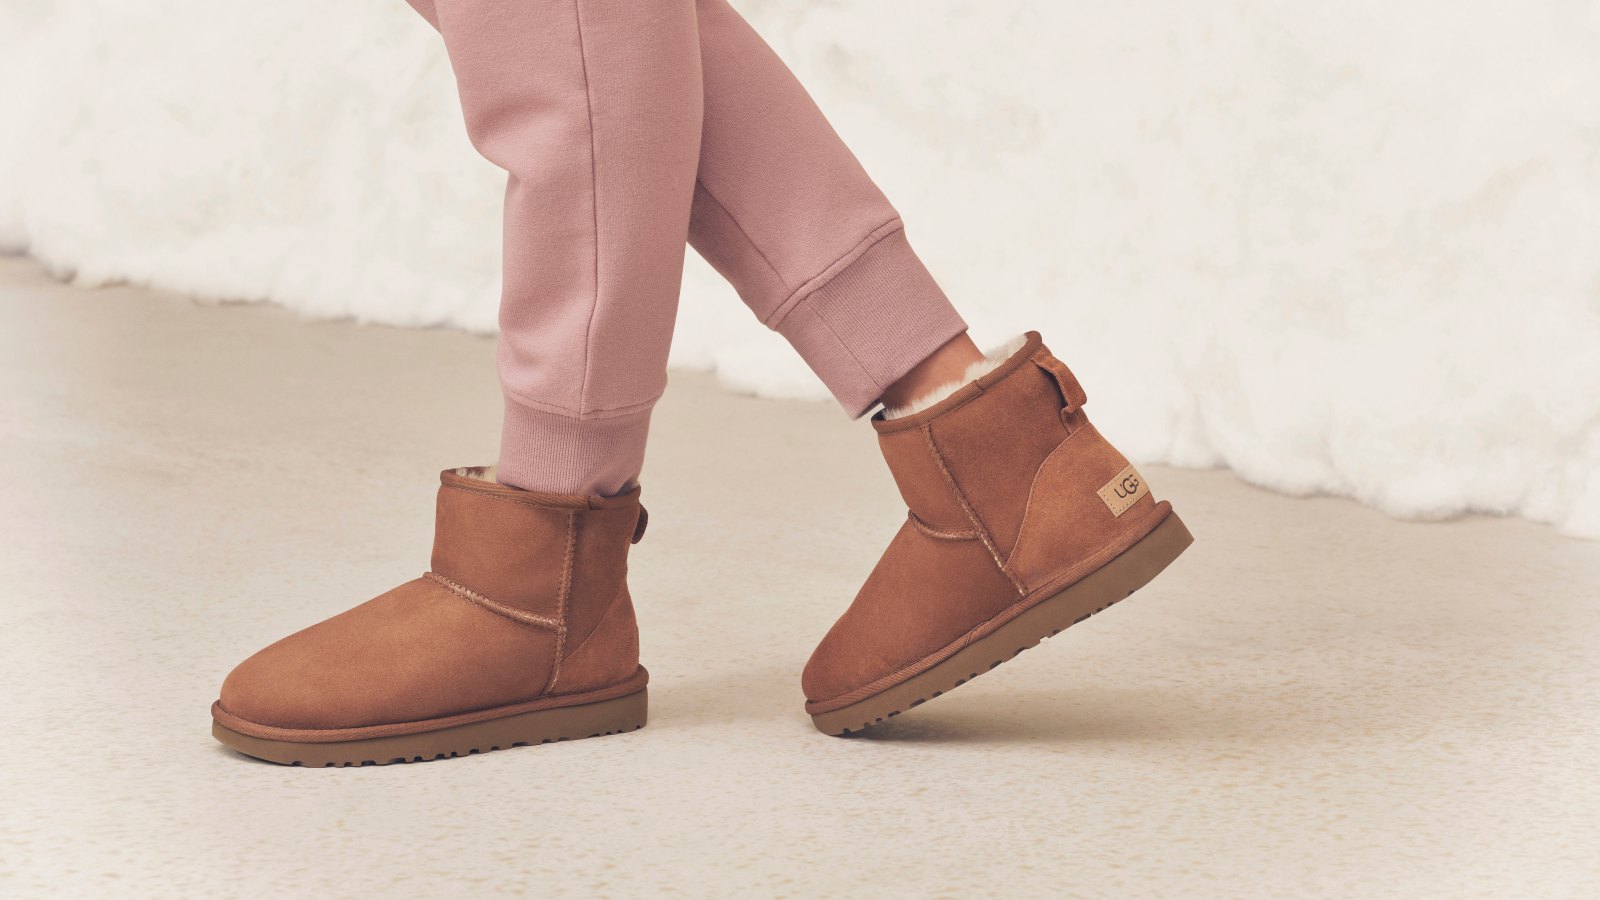 5 Cute Ways to Style Your Uggs This Winter